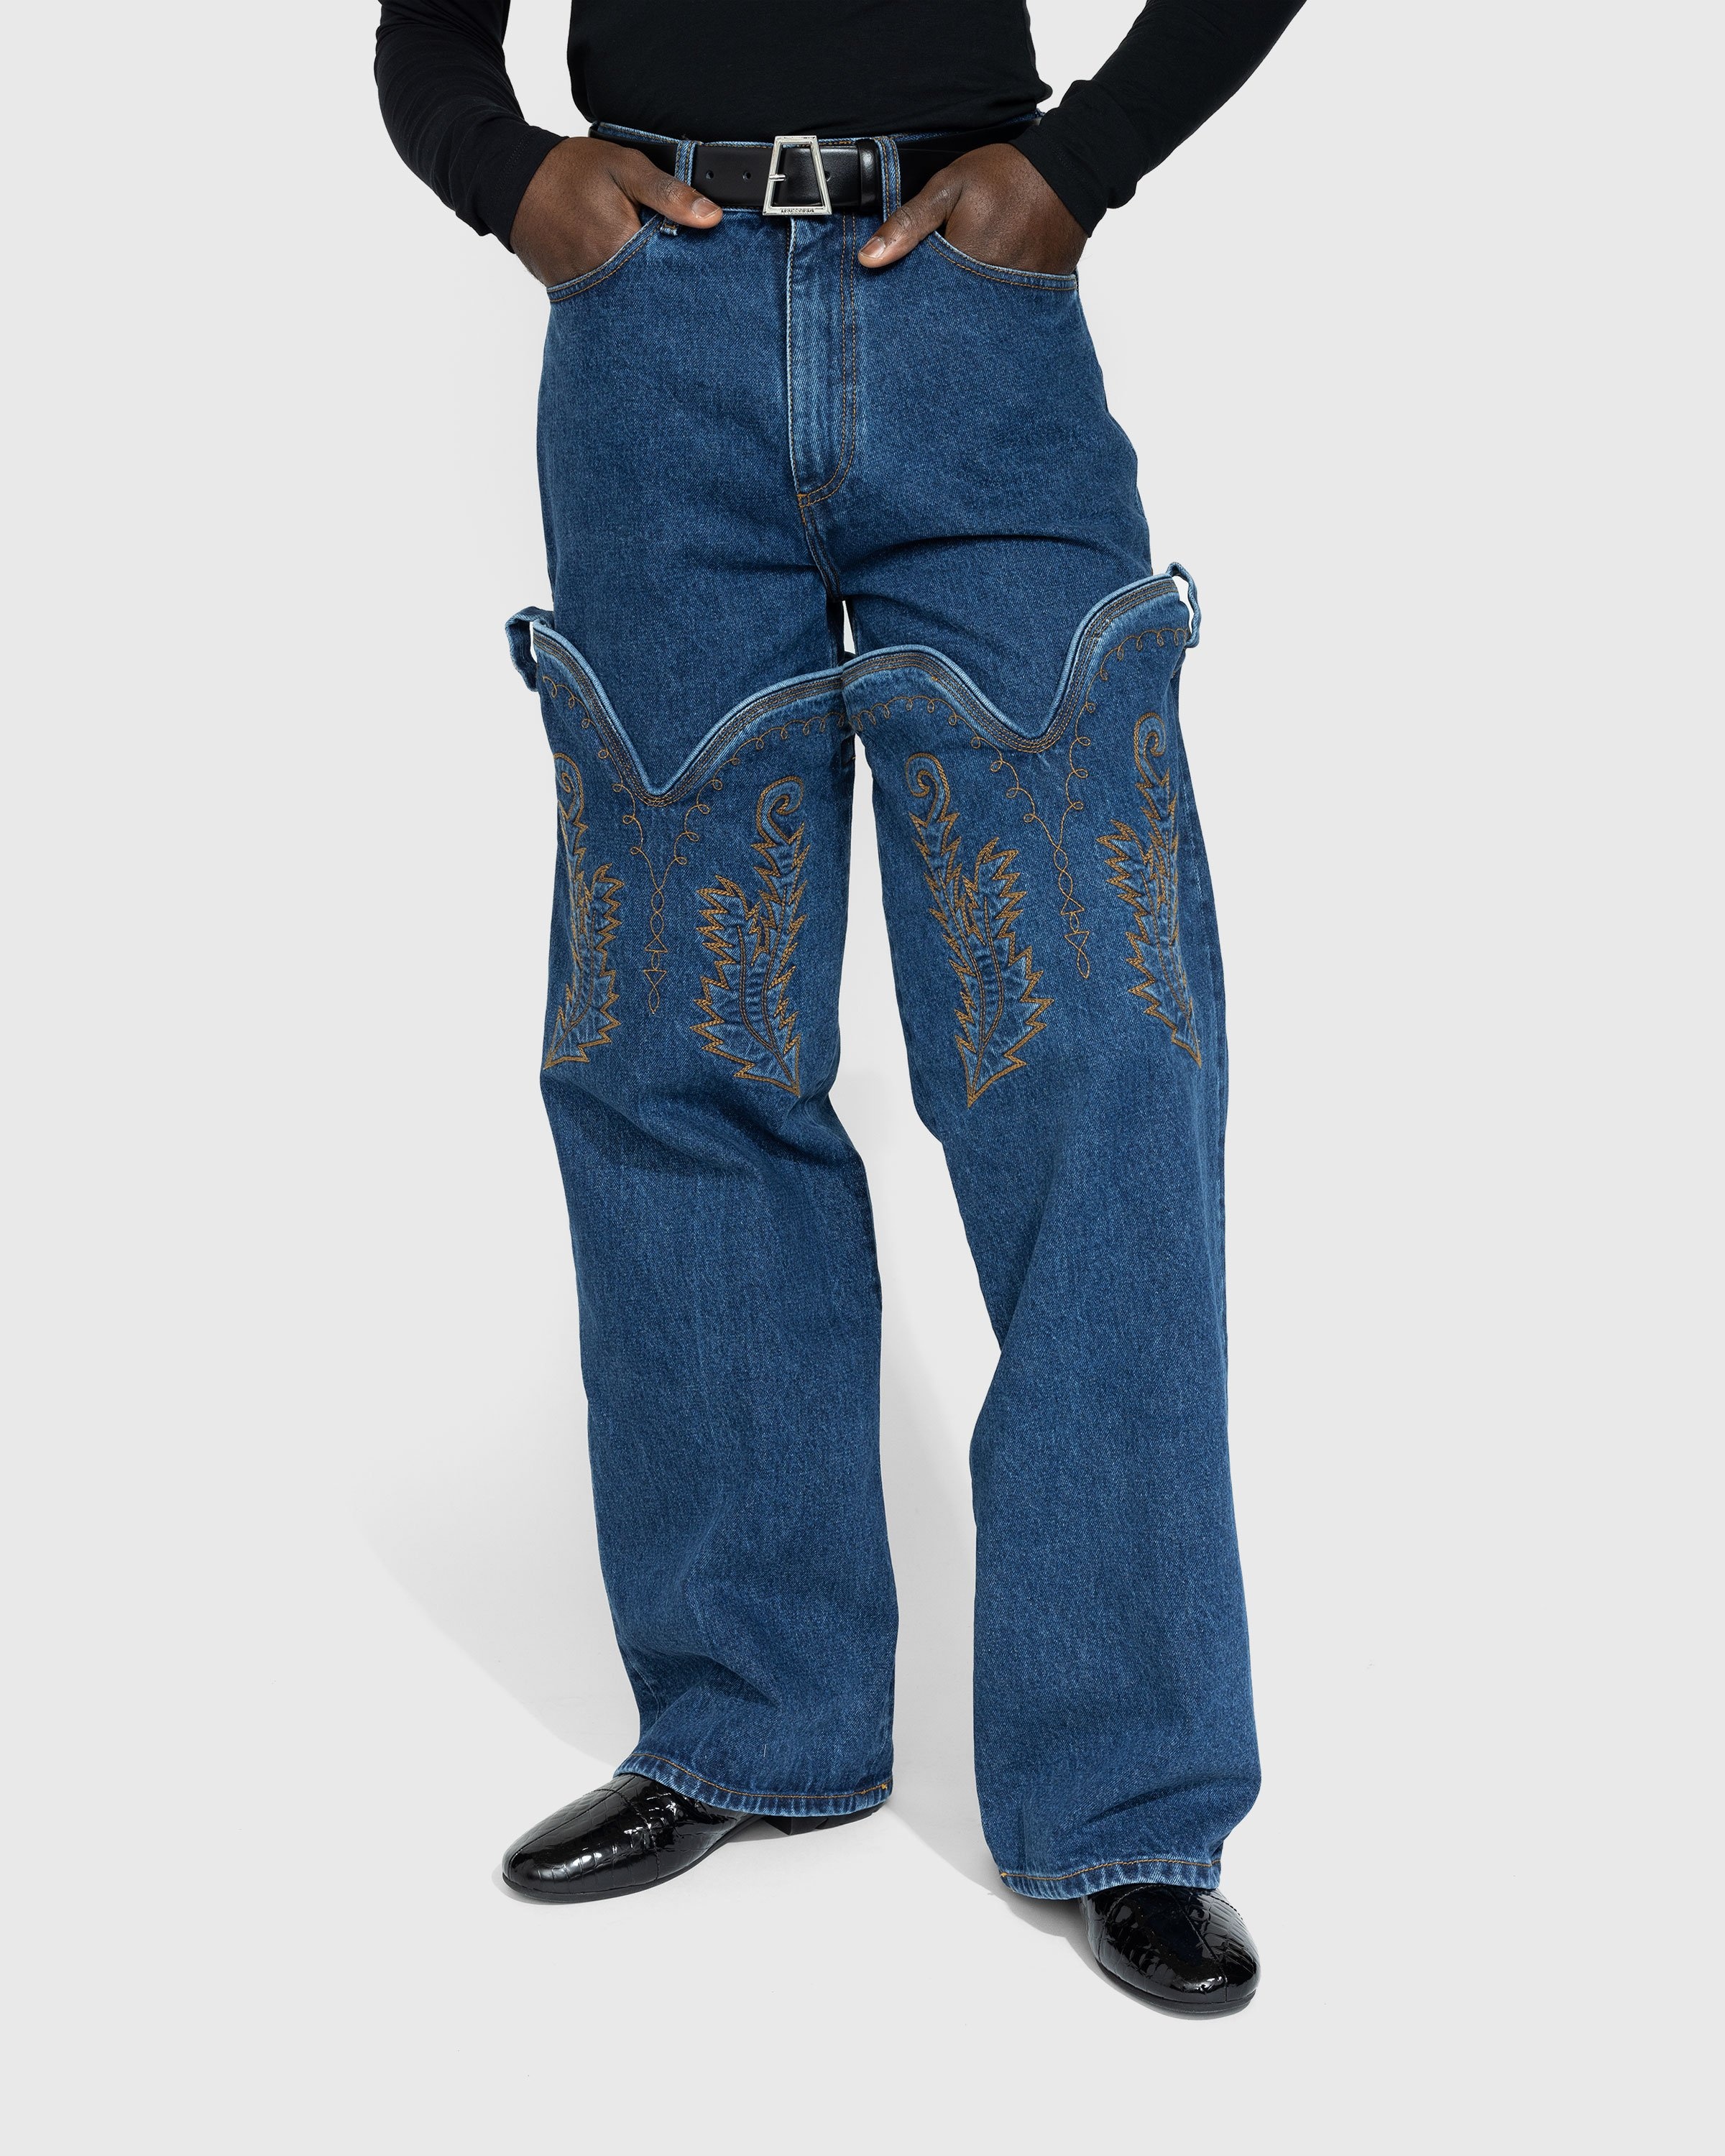 Y/PROJECT classic cowboy cuff jeans 29-